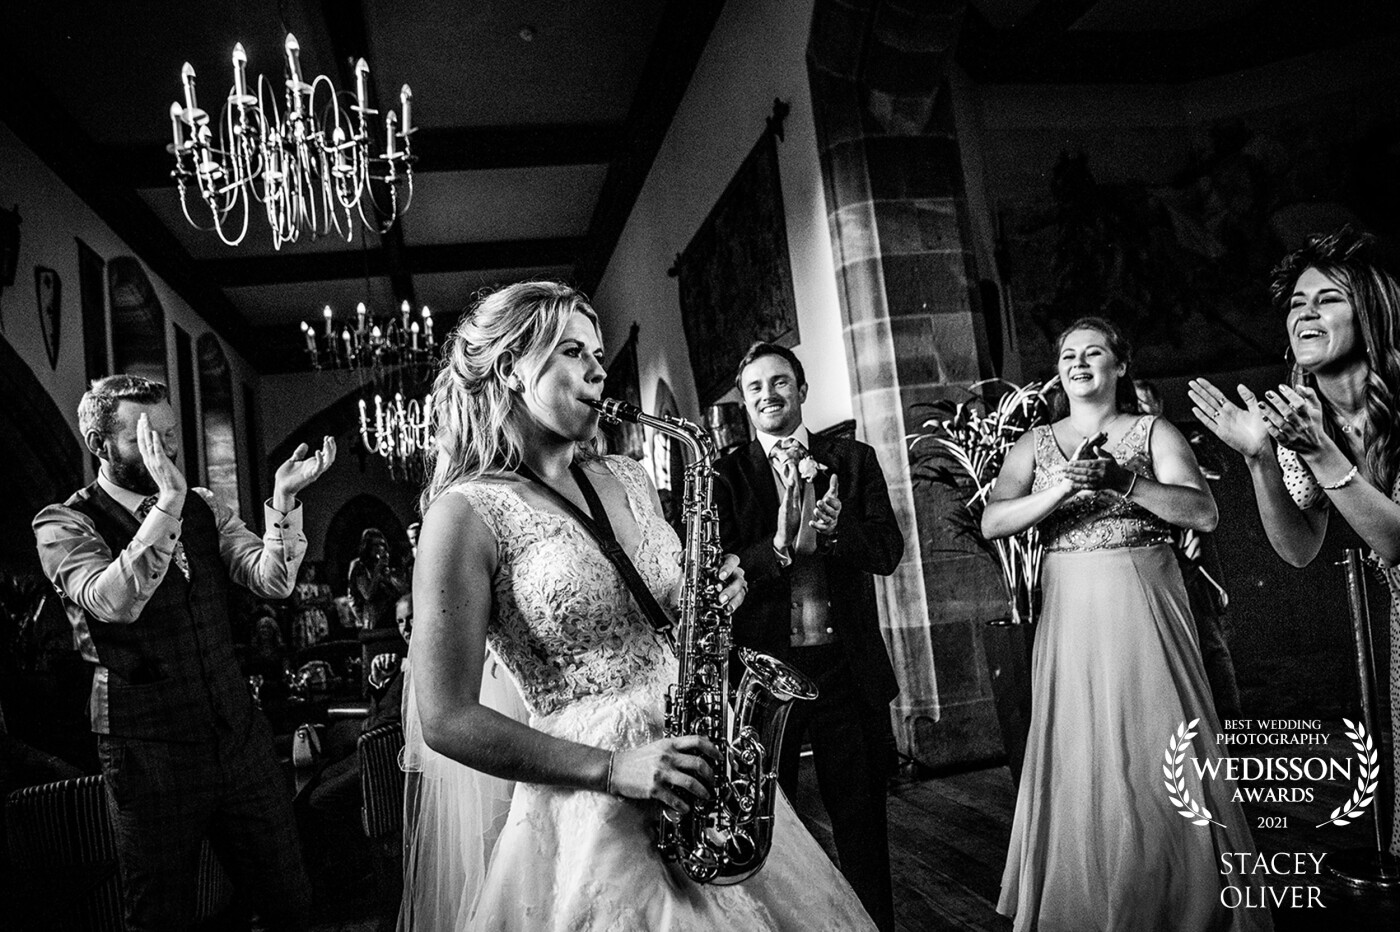 This bride Emily decided to entertain her guests by playing the saxophone. The venue Peckforton Castle in Cheshire was the perfect backdrop,  her guests and husband had a huge surprise.